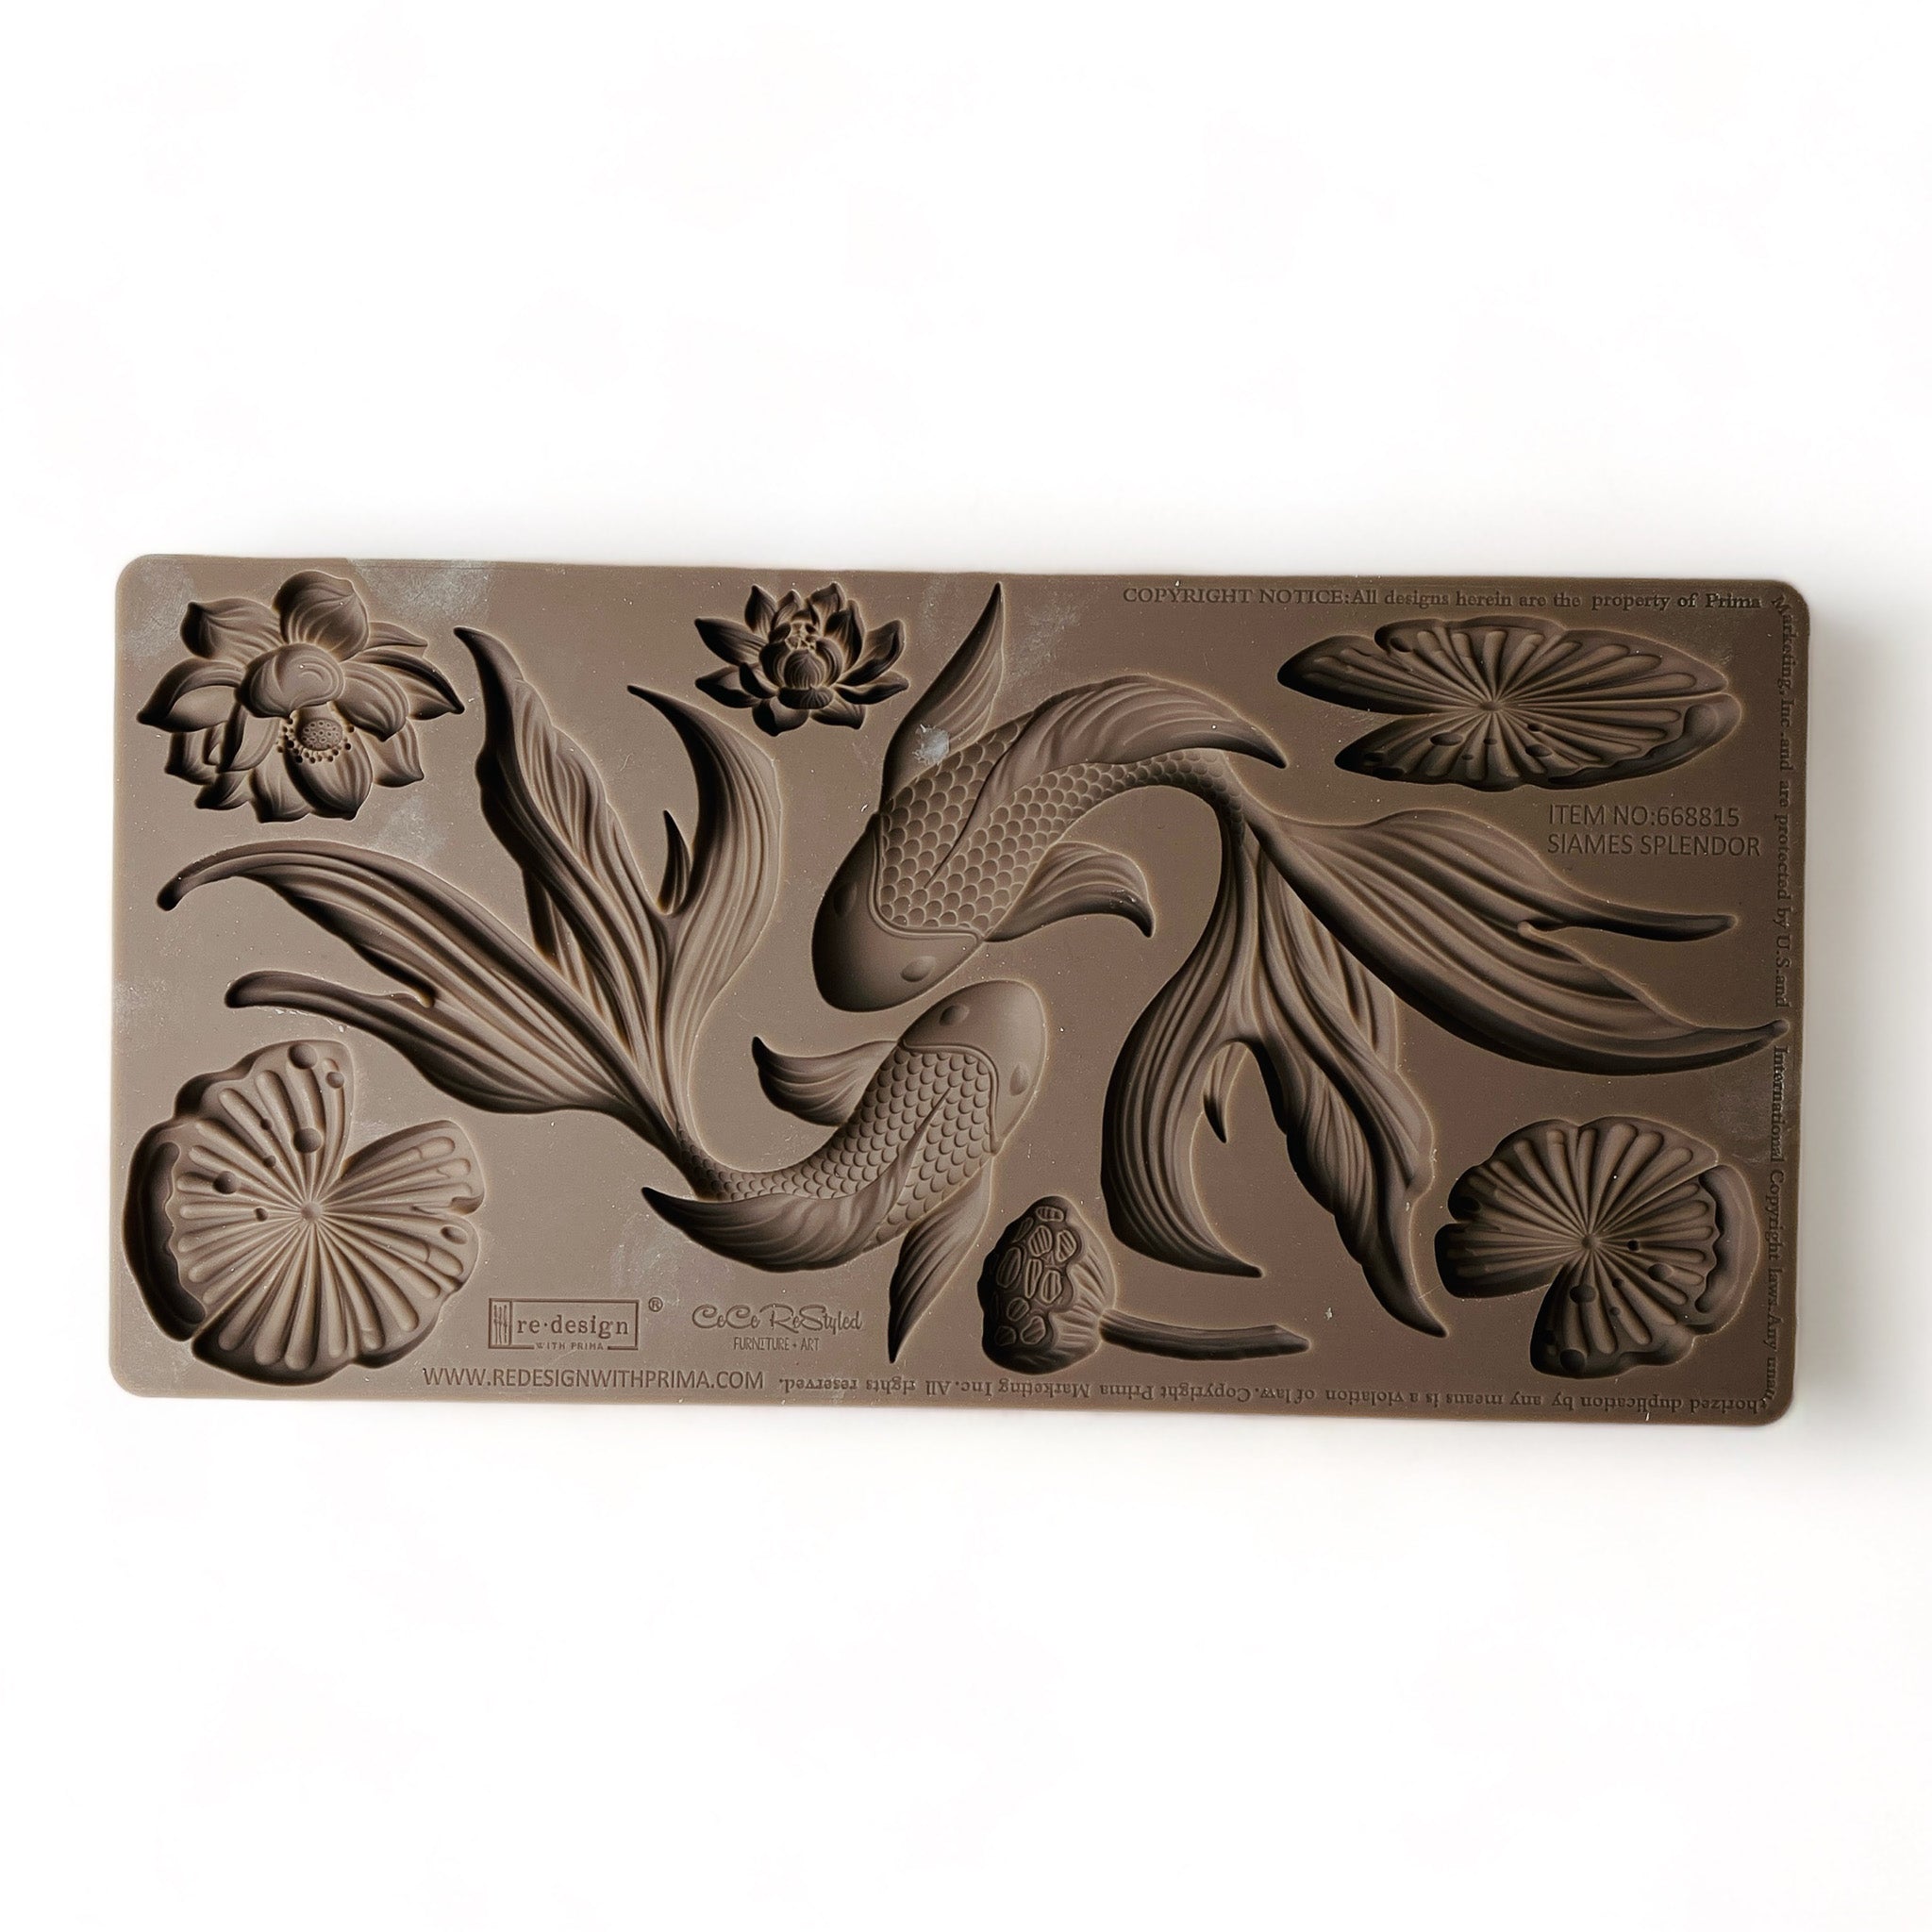 A brown silicone mold featuring 2 intricately-detailed koi fish, surrounded by water lilies and lily pads is against a white background.